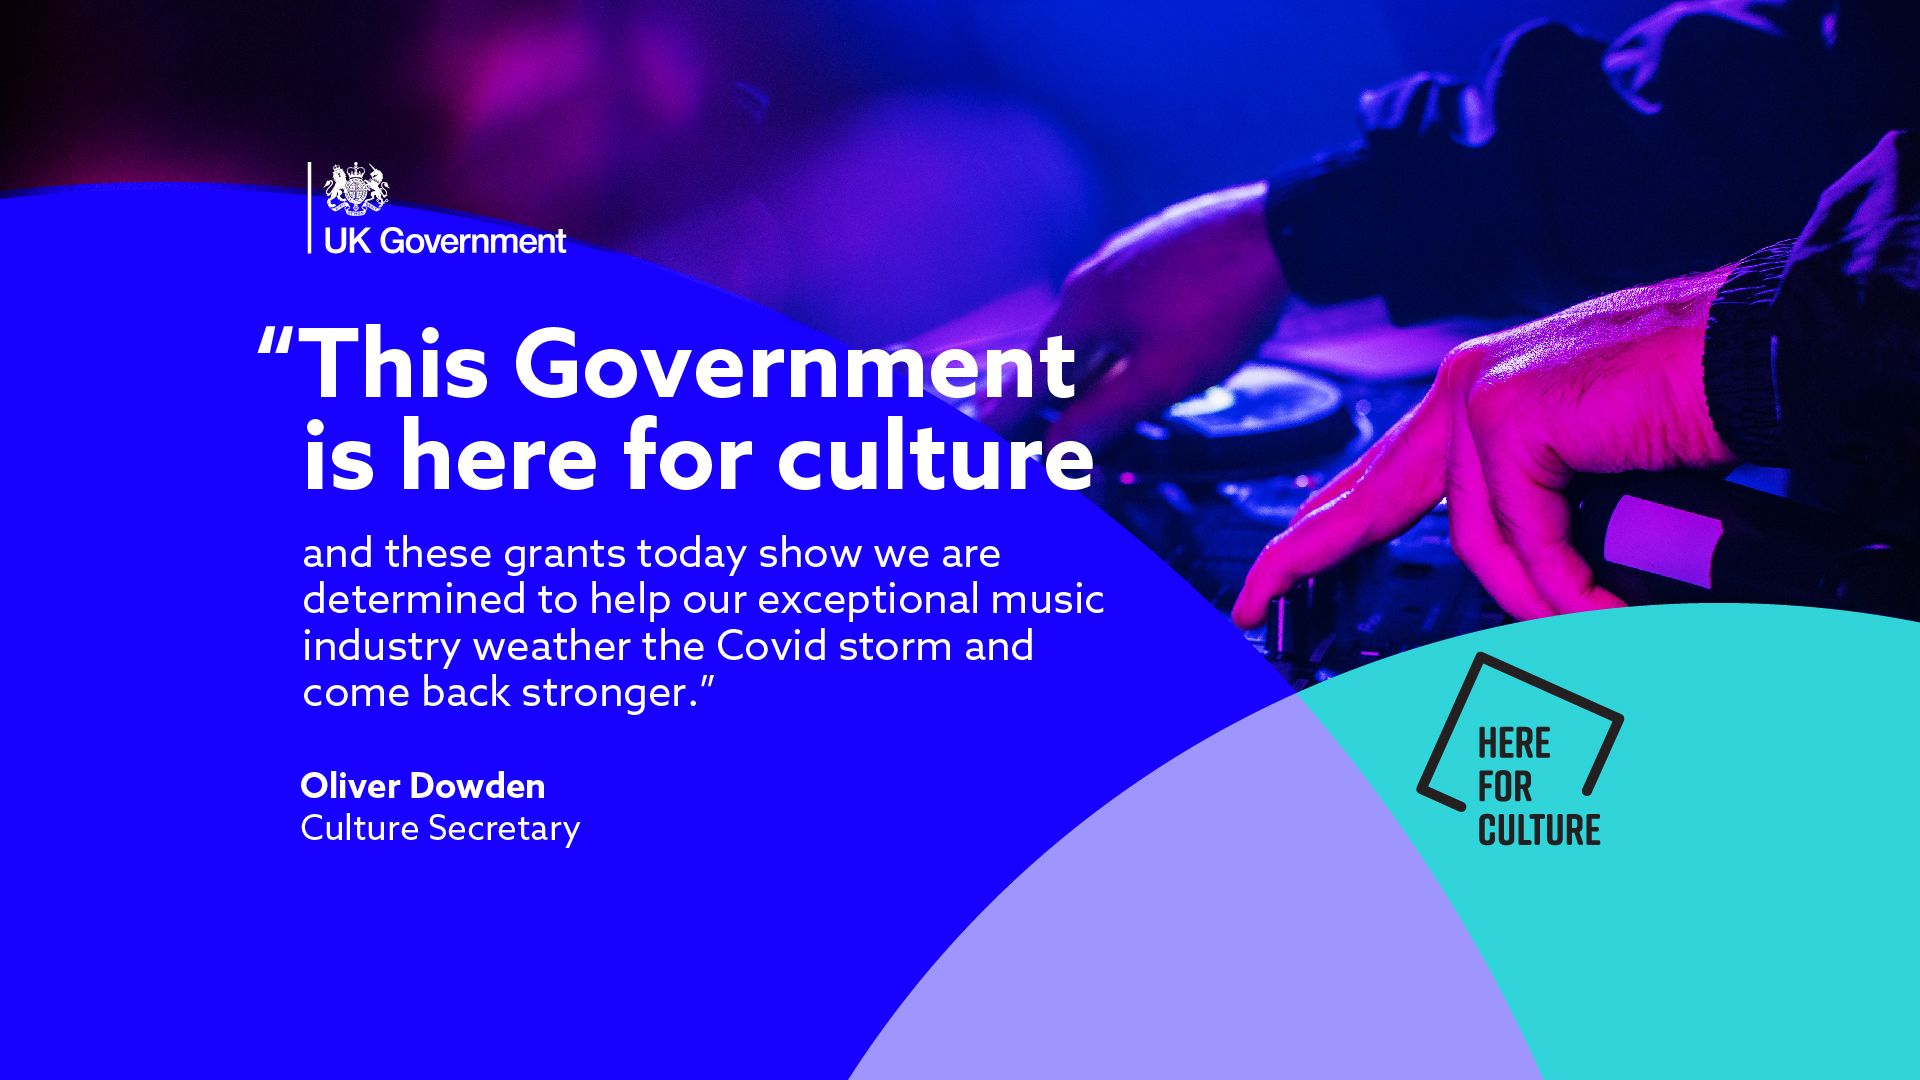 Quote graphic by Culture Secretary, Oliver Dowden, said: “This Government is here for culture and these grants today show we are determined to help our exceptional music industry weather the Covid storm and come back stronger."